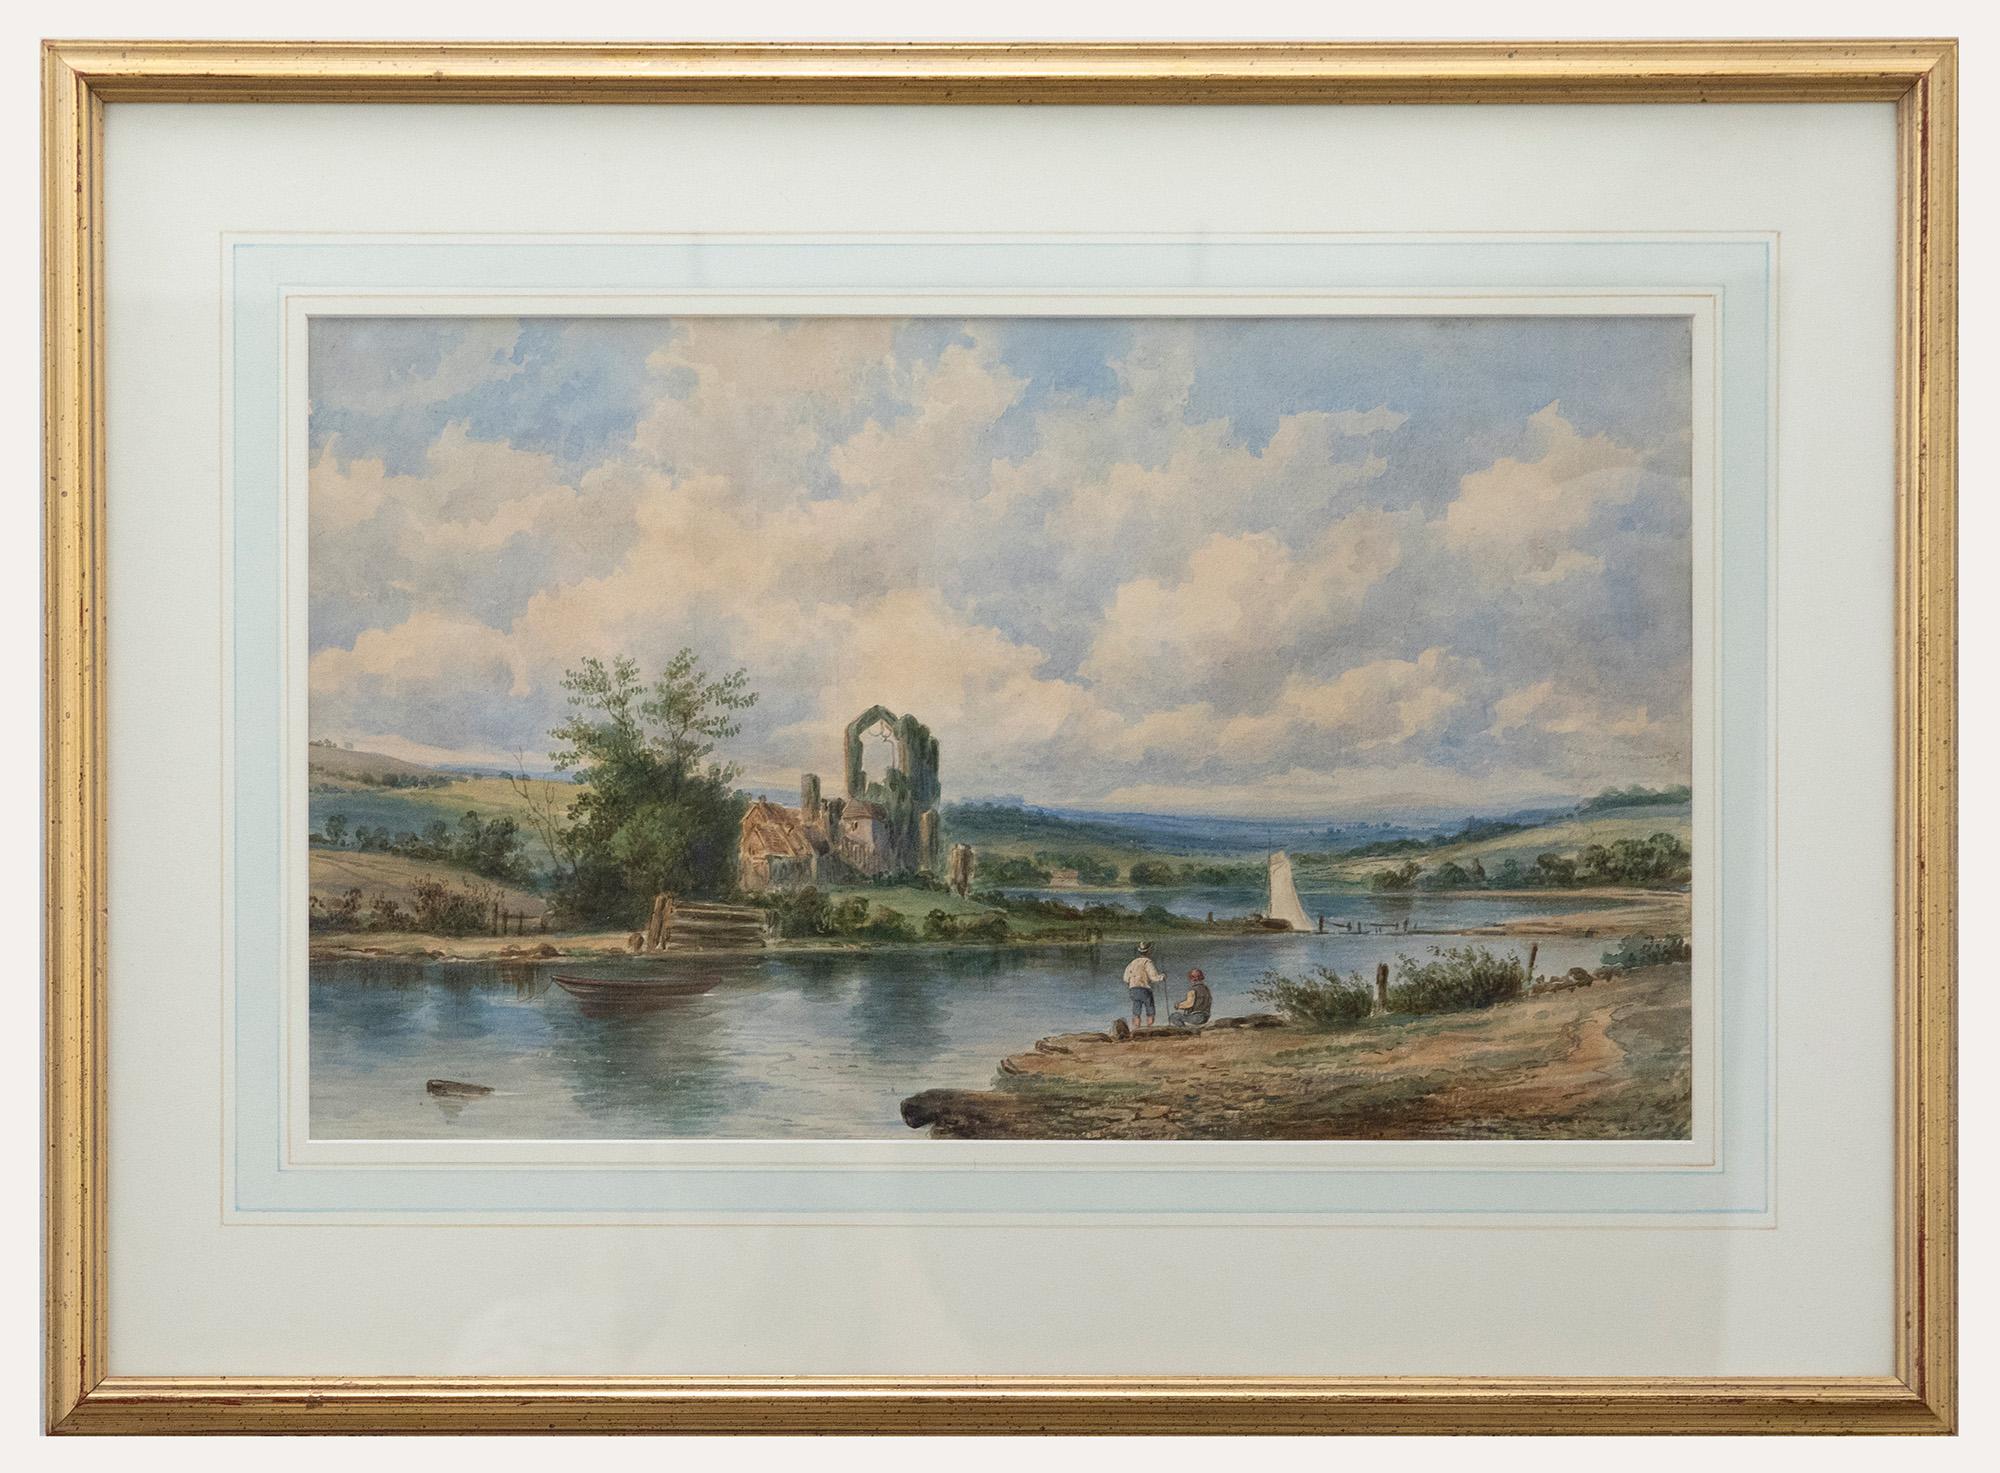 Unknown Landscape Art - Mid 19th Century Watercolour - Fishing by the Abbey Ruins